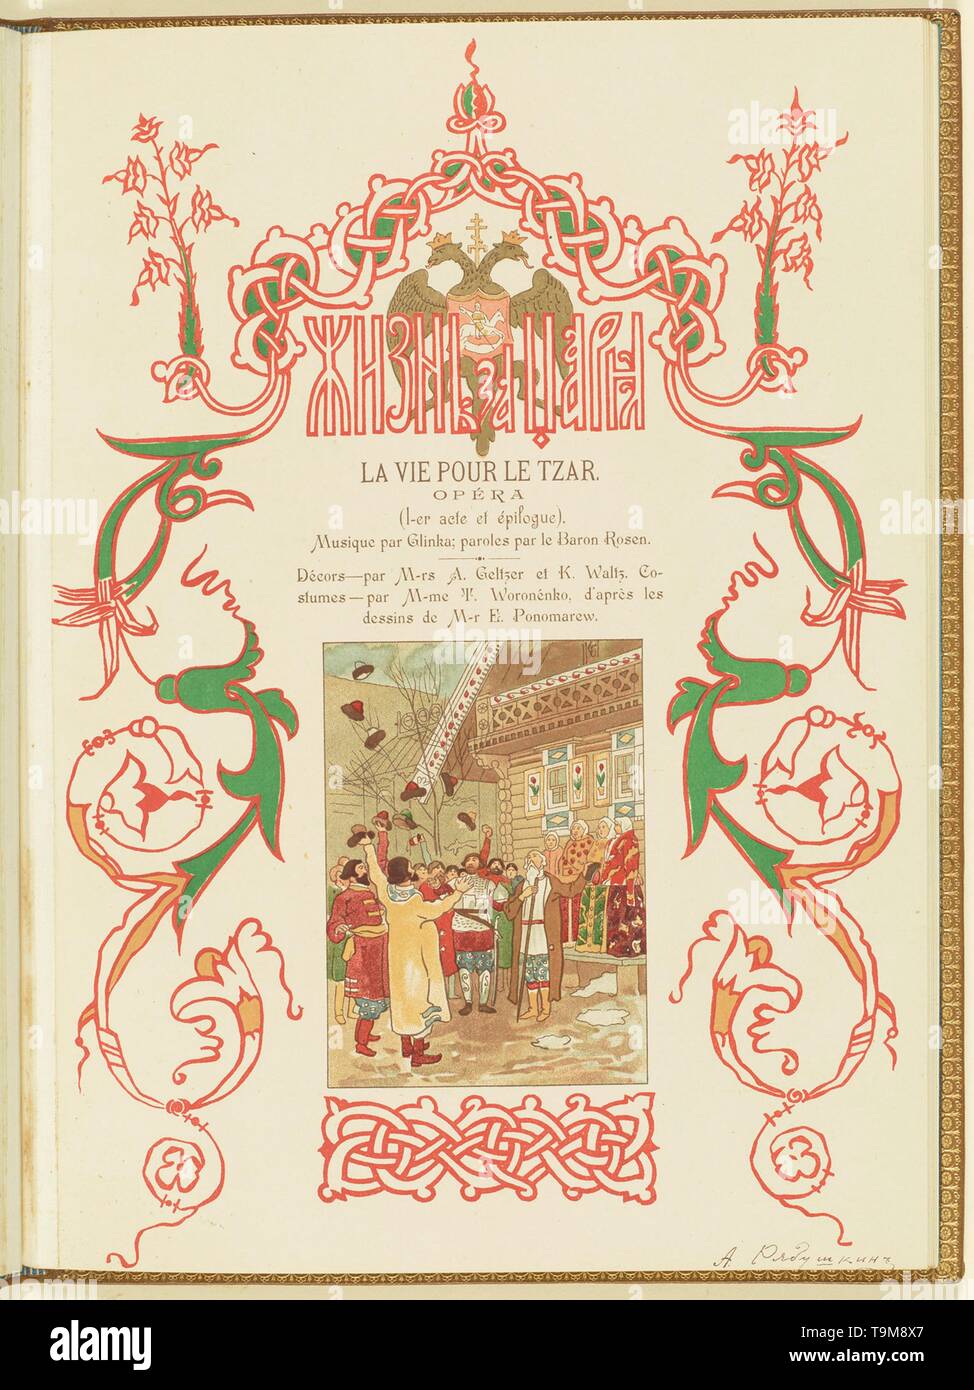 Program for the opera A Life for the Tsar by M. Glinka. Museum: PRIVATE COLLECTION. Author: Andrei Petrovich Ryabushkin. Stock Photo